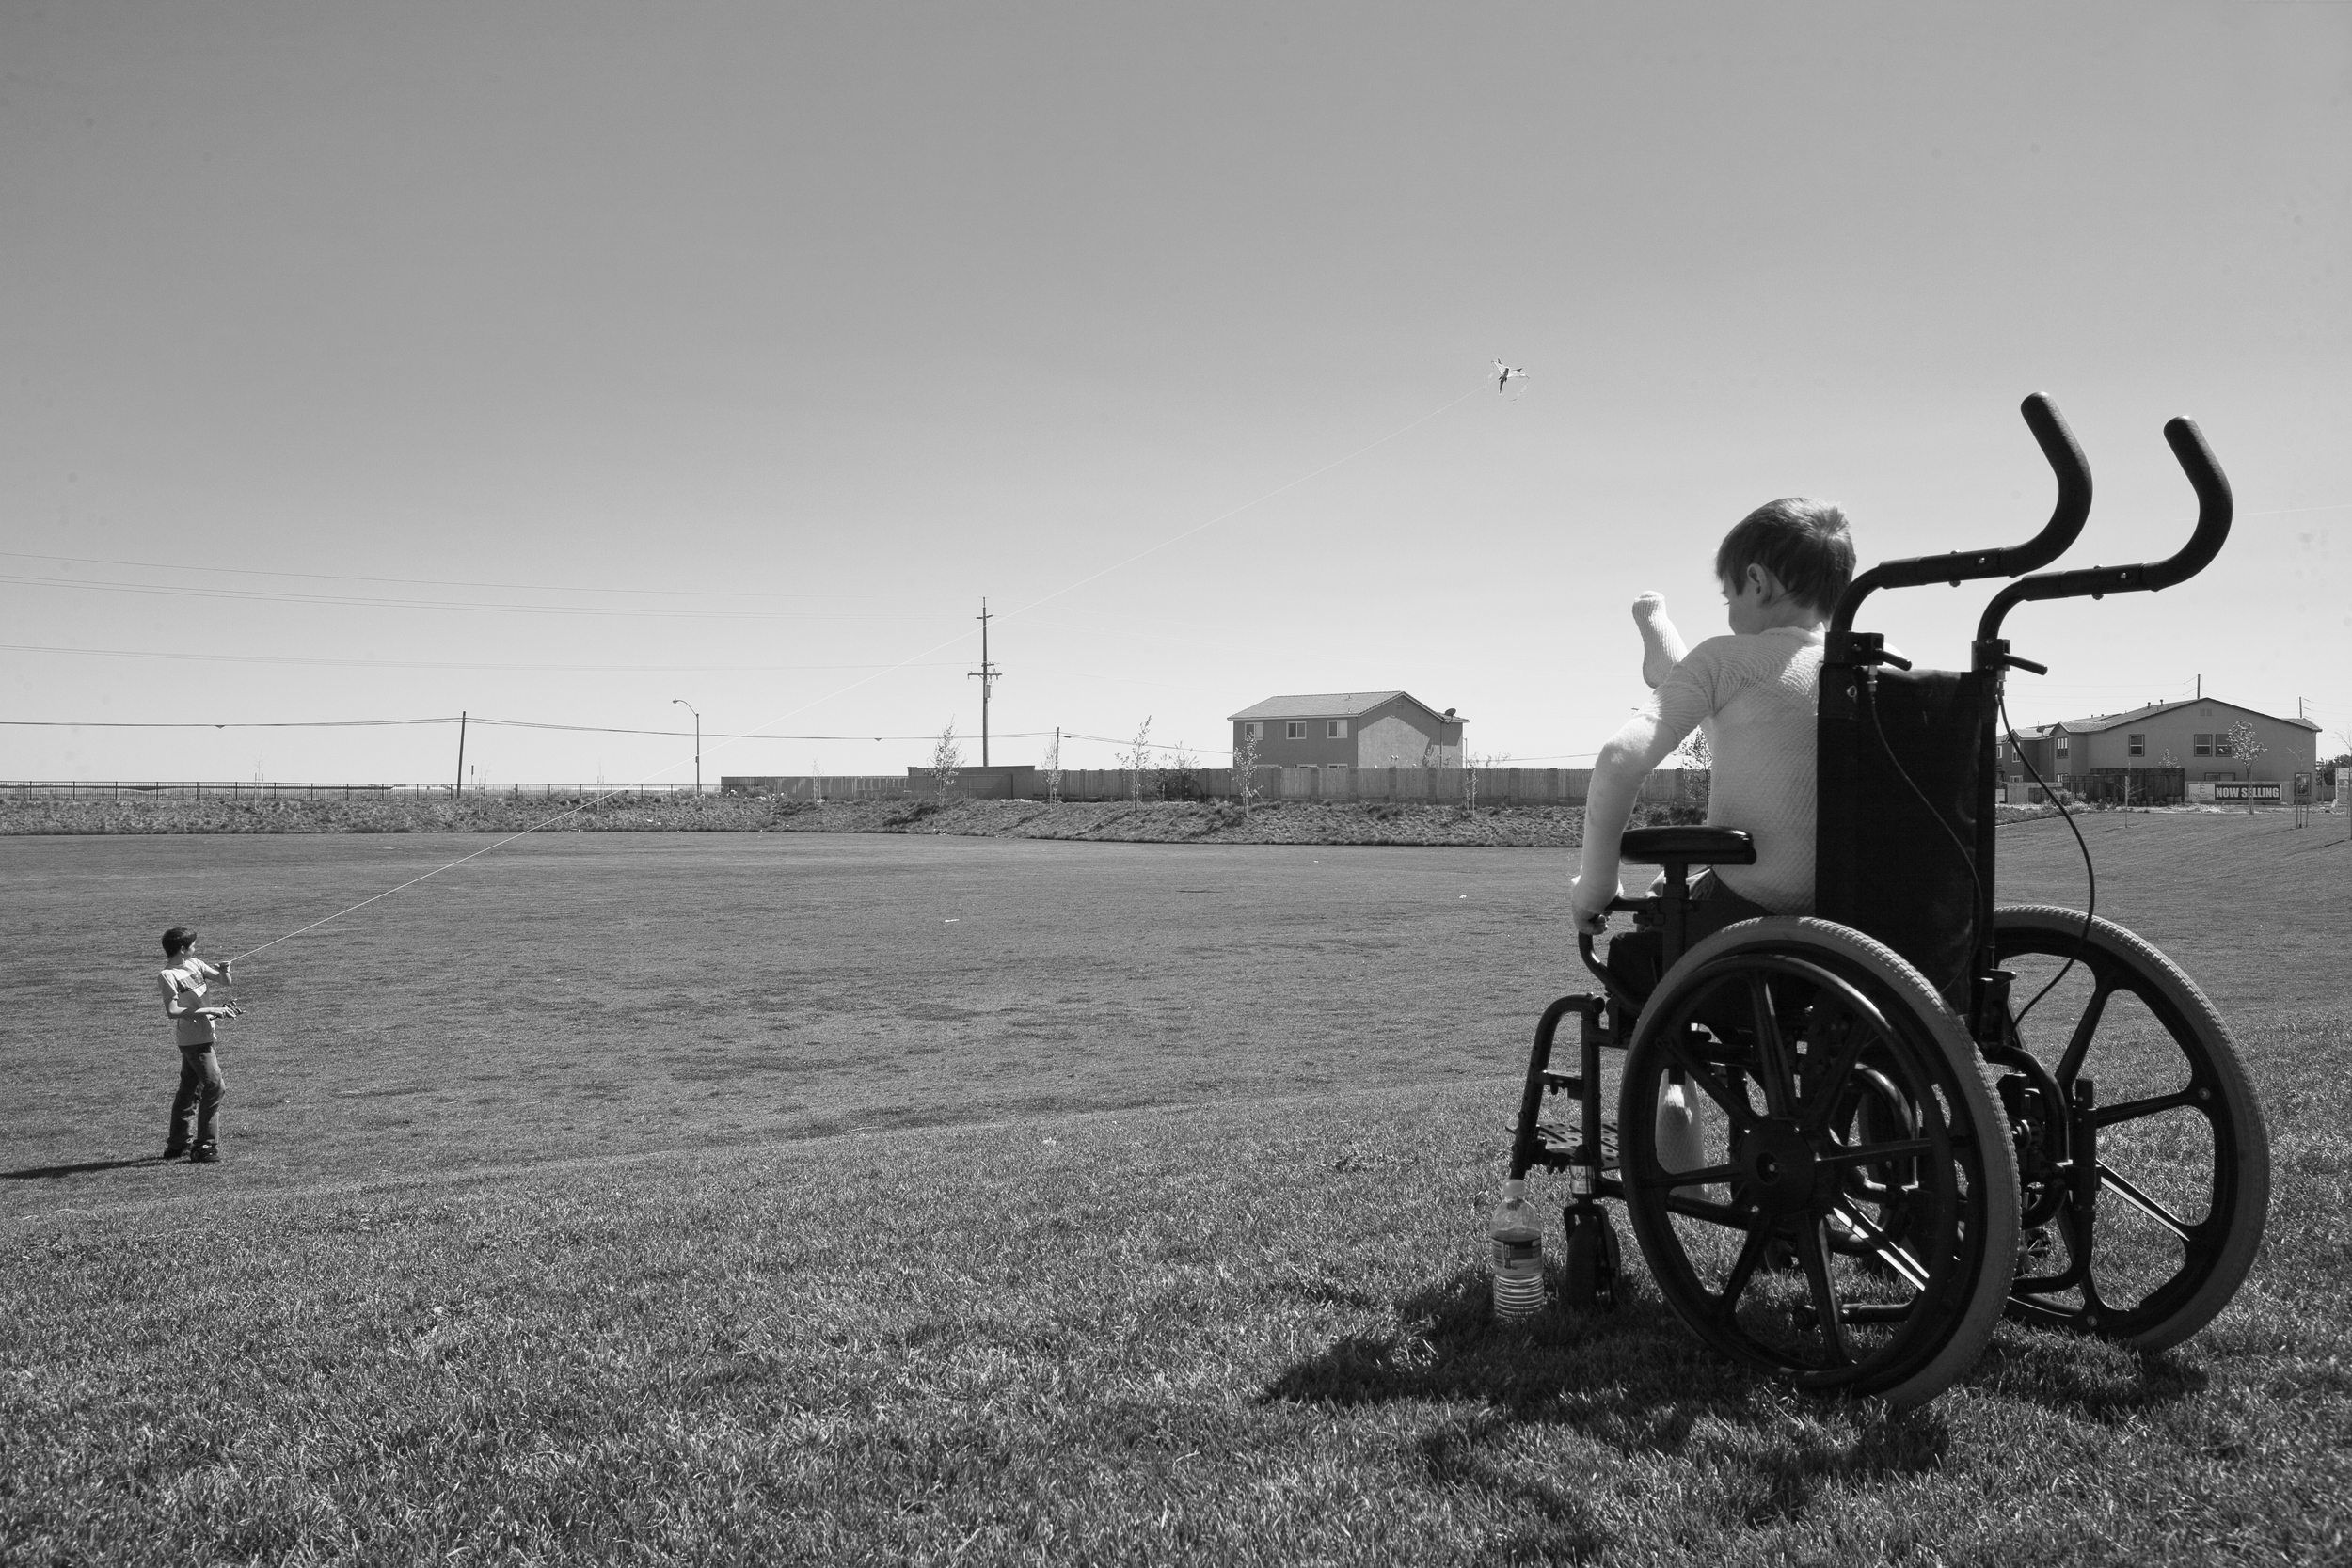  Garrett Spaulding, 12, born with Epidermolysis watchesfrom his wheel chair as his brother David flies a kite on a windy afternoon. Garrett doesn’t have the strength to control the kite himself in a strong wind, nor does he like the feel of it in his